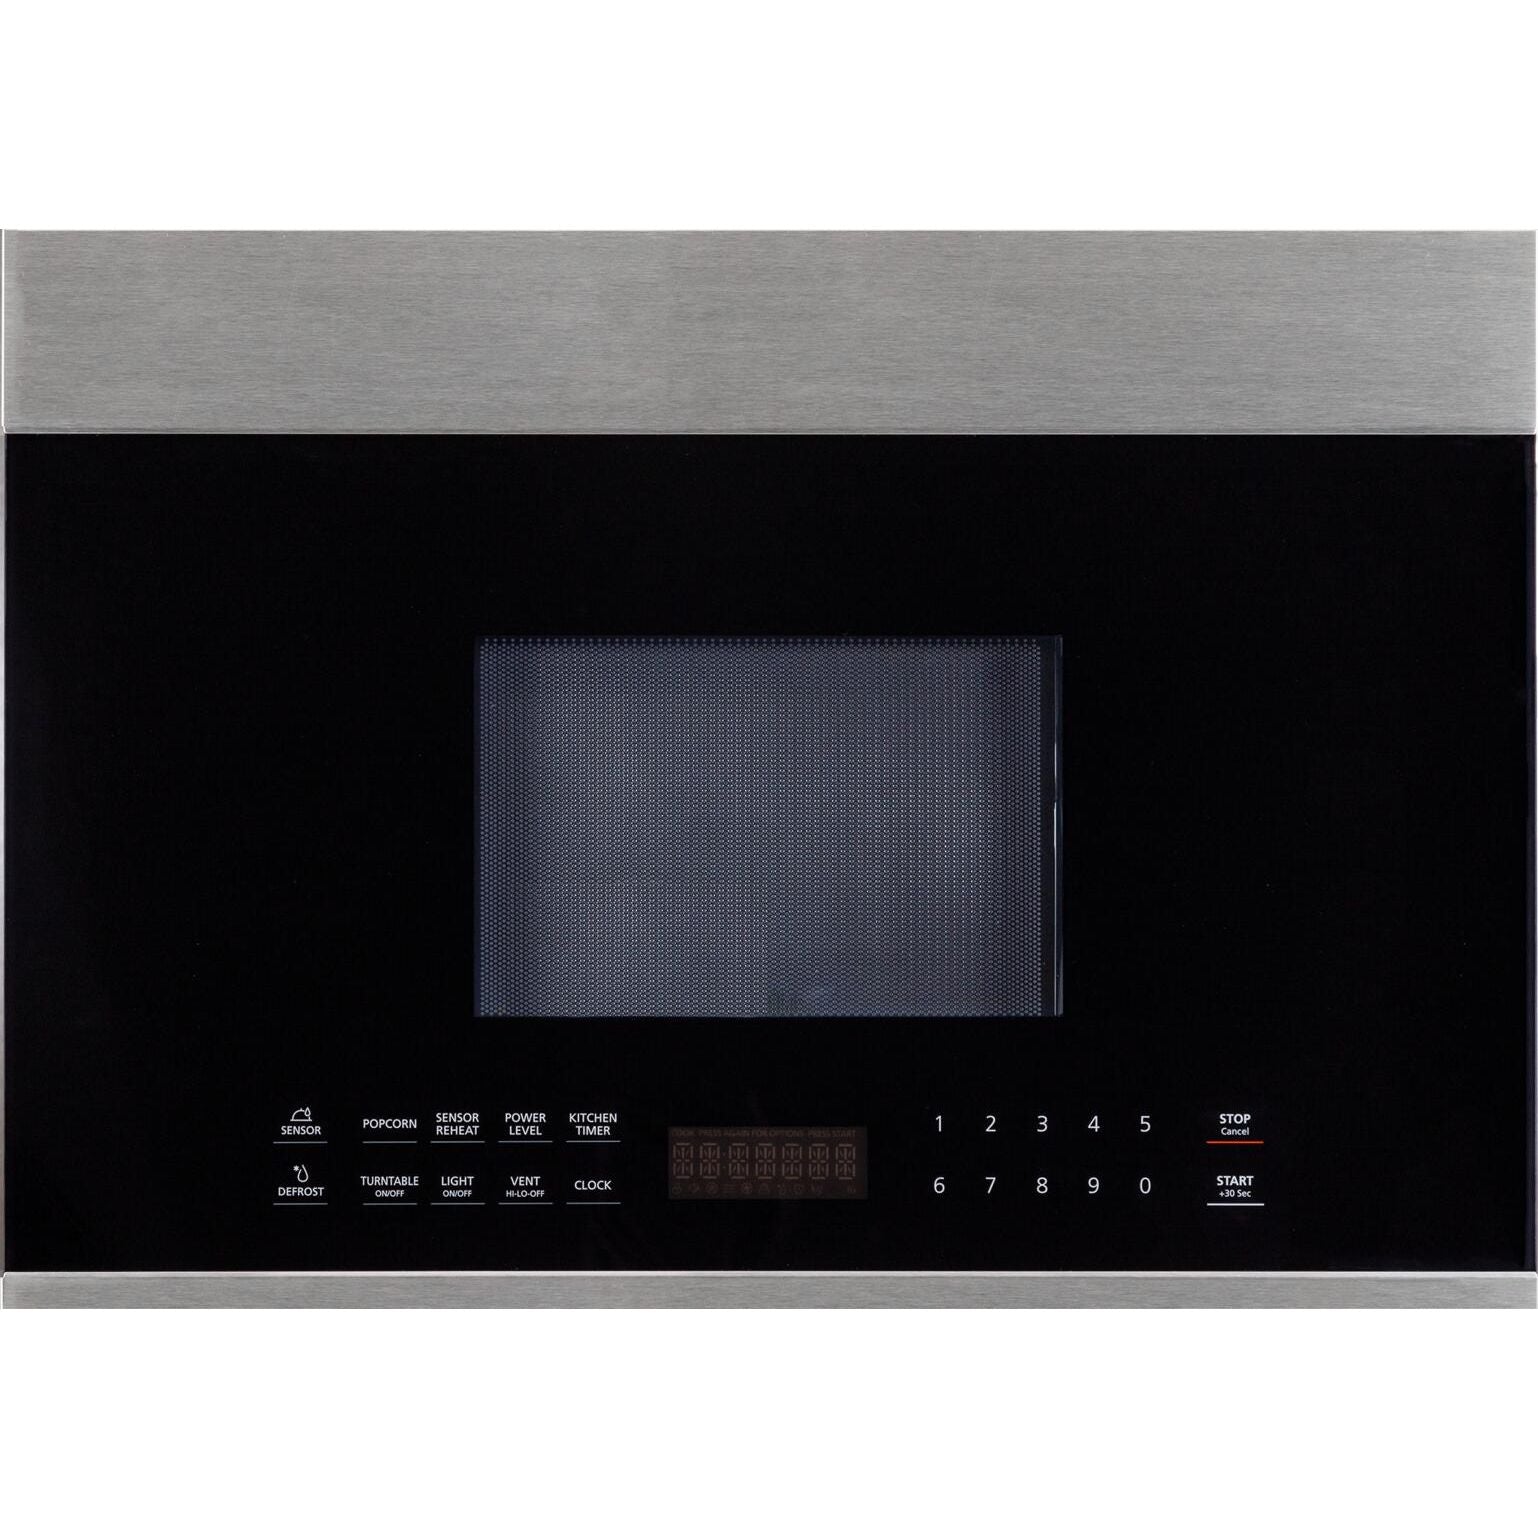 Forte 24" Over-the-Range Microwave Oven - 1.3 cu. ft., 1000 Cooking Watts, 300 CFM Ducted Venting, 10 Power Levels - Stainless Steel (F2413MV5SS) - New Star Living